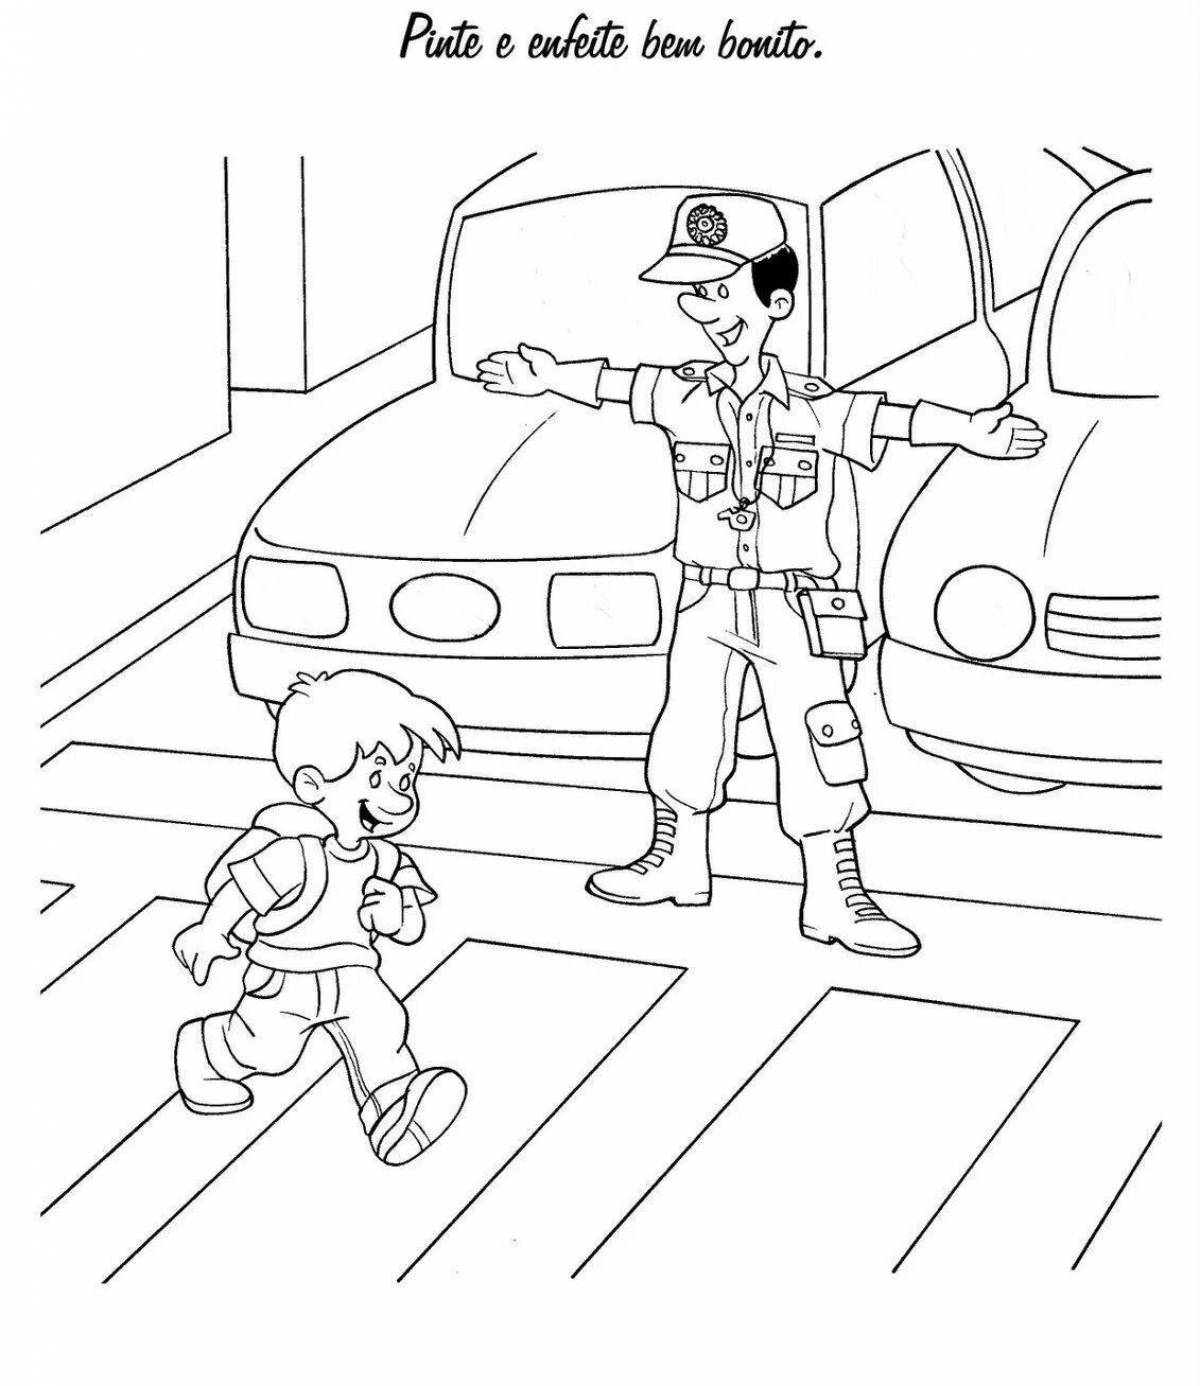 Playful traffic controller coloring page for kids